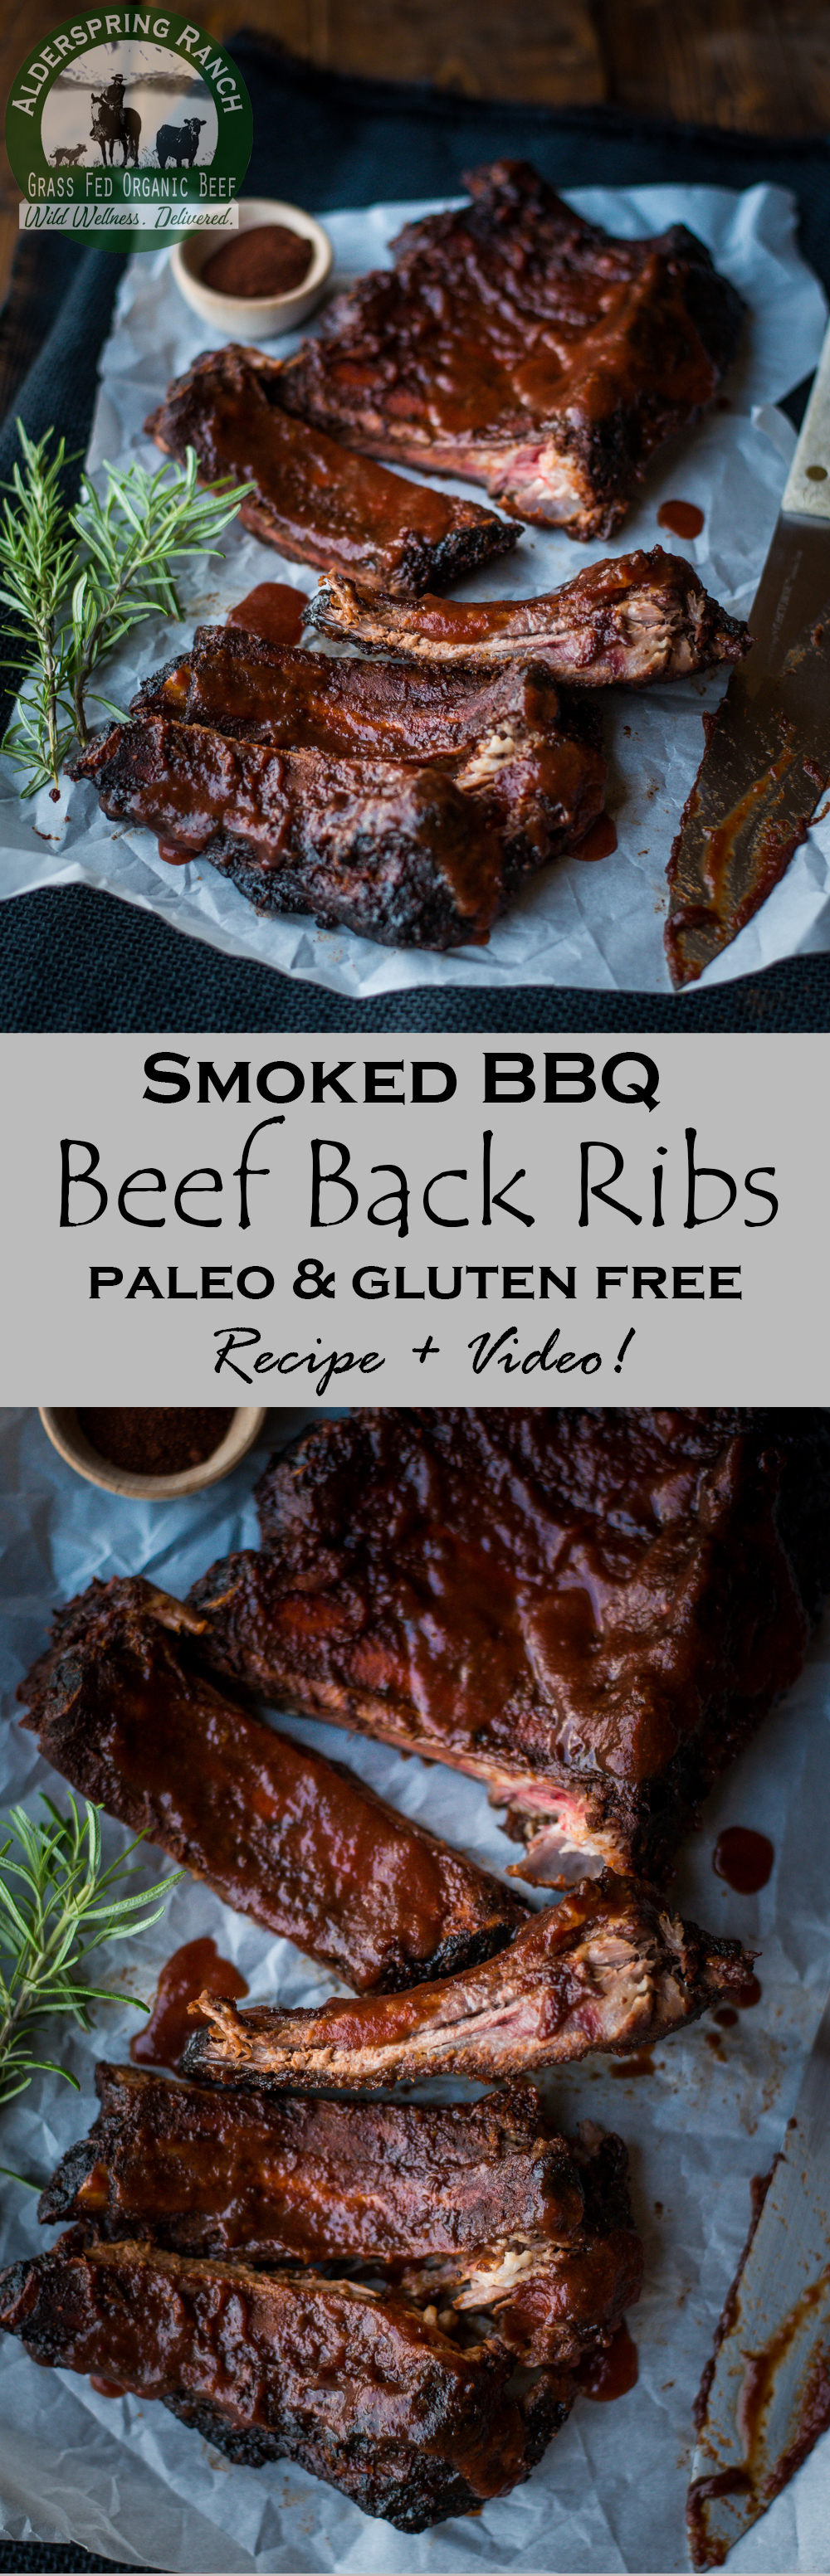 This easy beef back rib recipe makes for some dang good smoked barbecue ribs! Recipe and how-to video. Paleo, gluten-free!